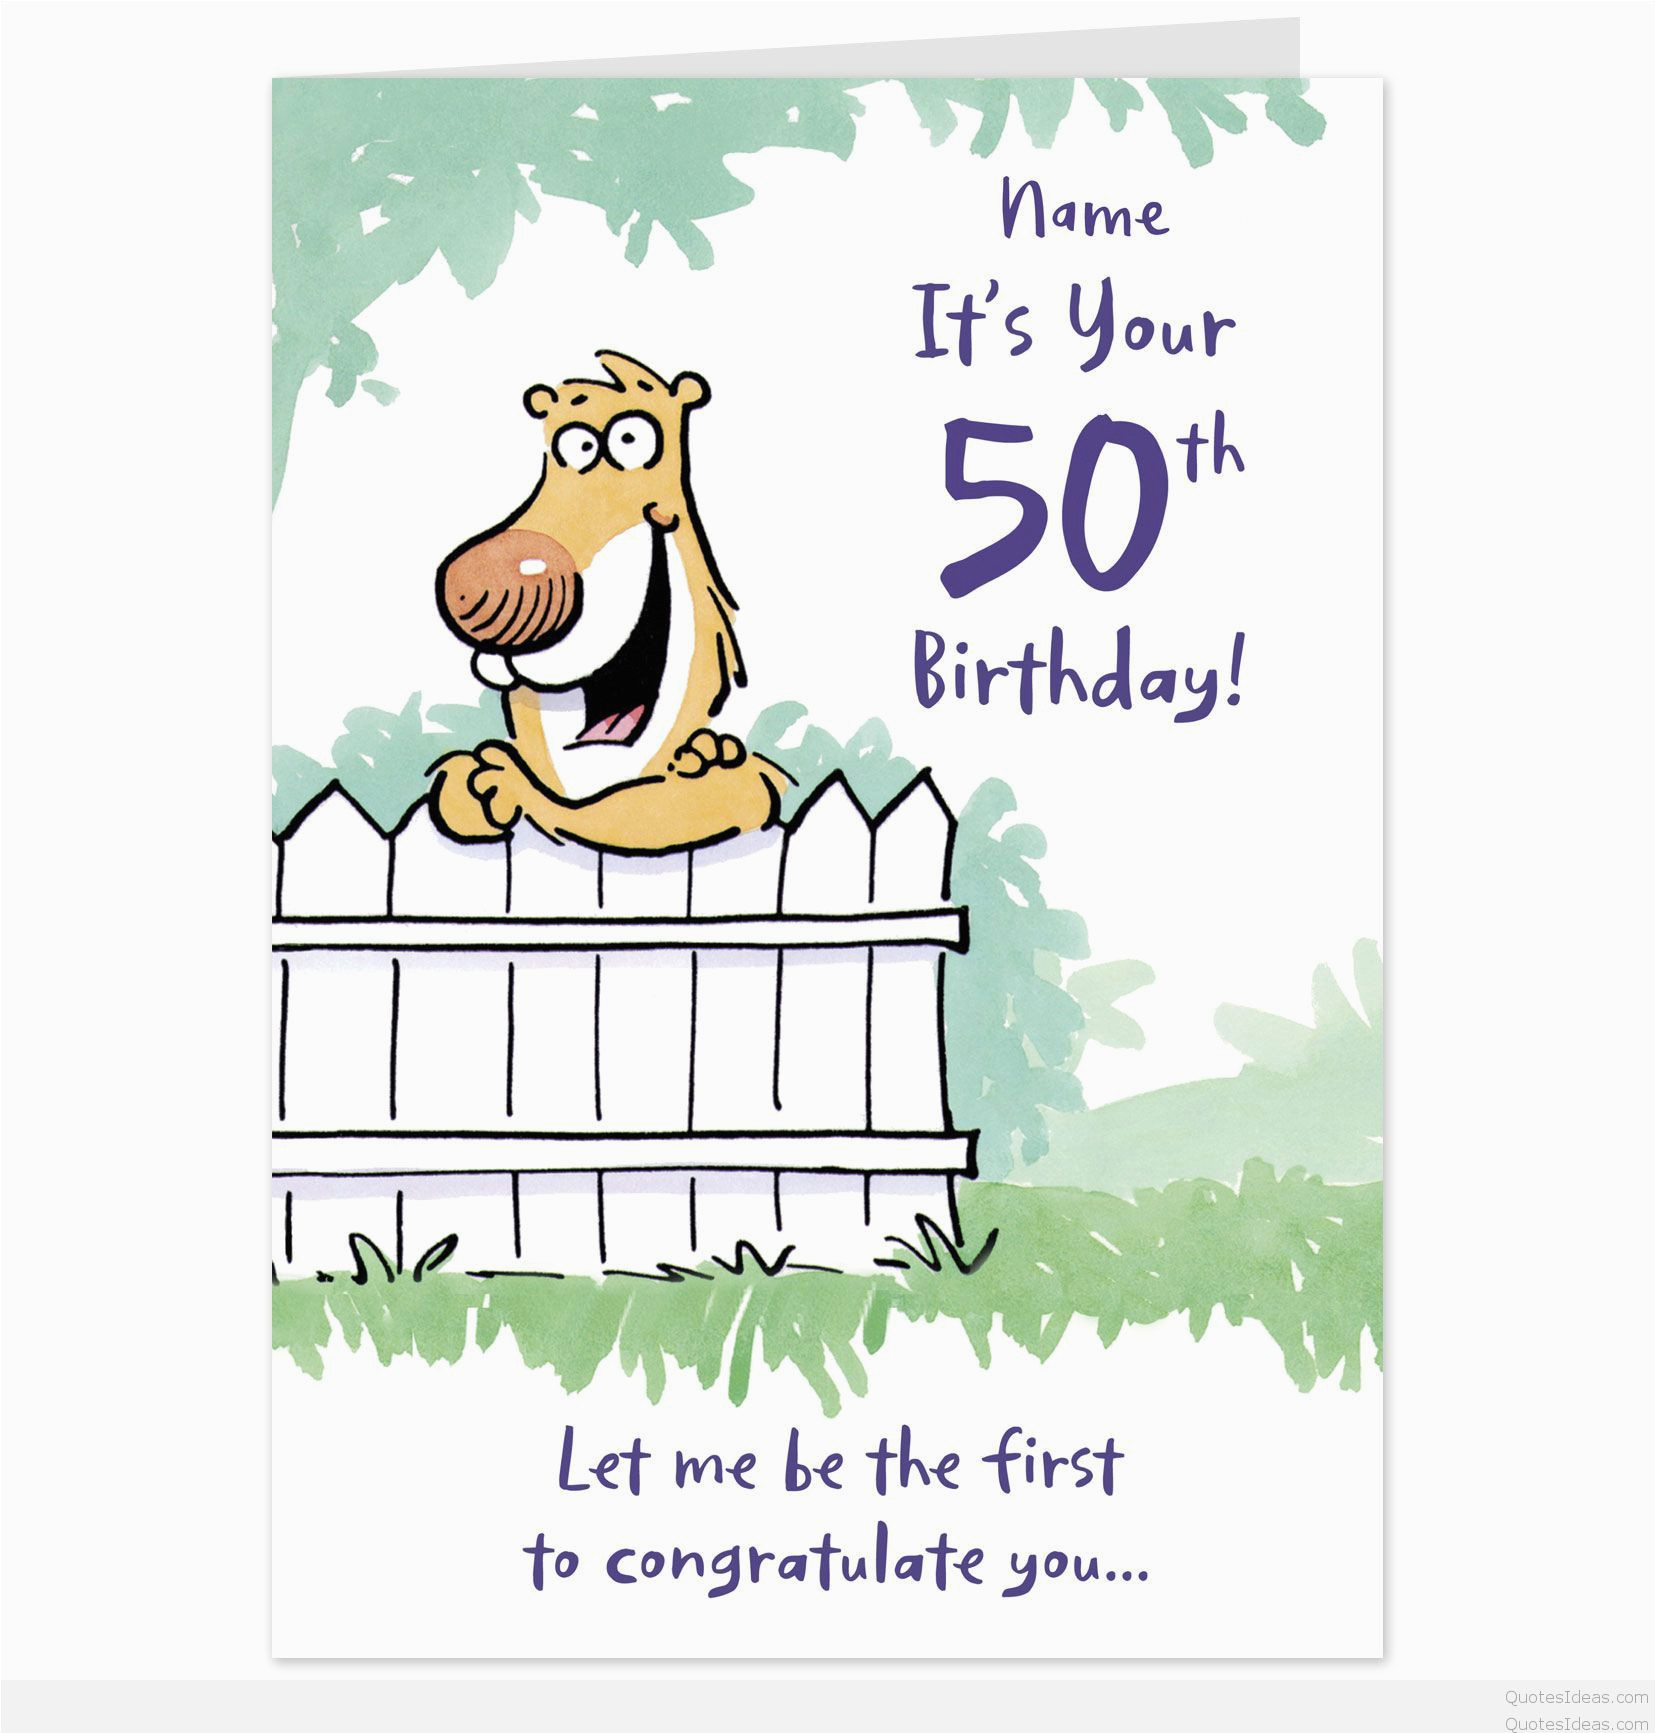 Funny Birthday Quotes Friend
 Funny Birthday Card Verses for Friends